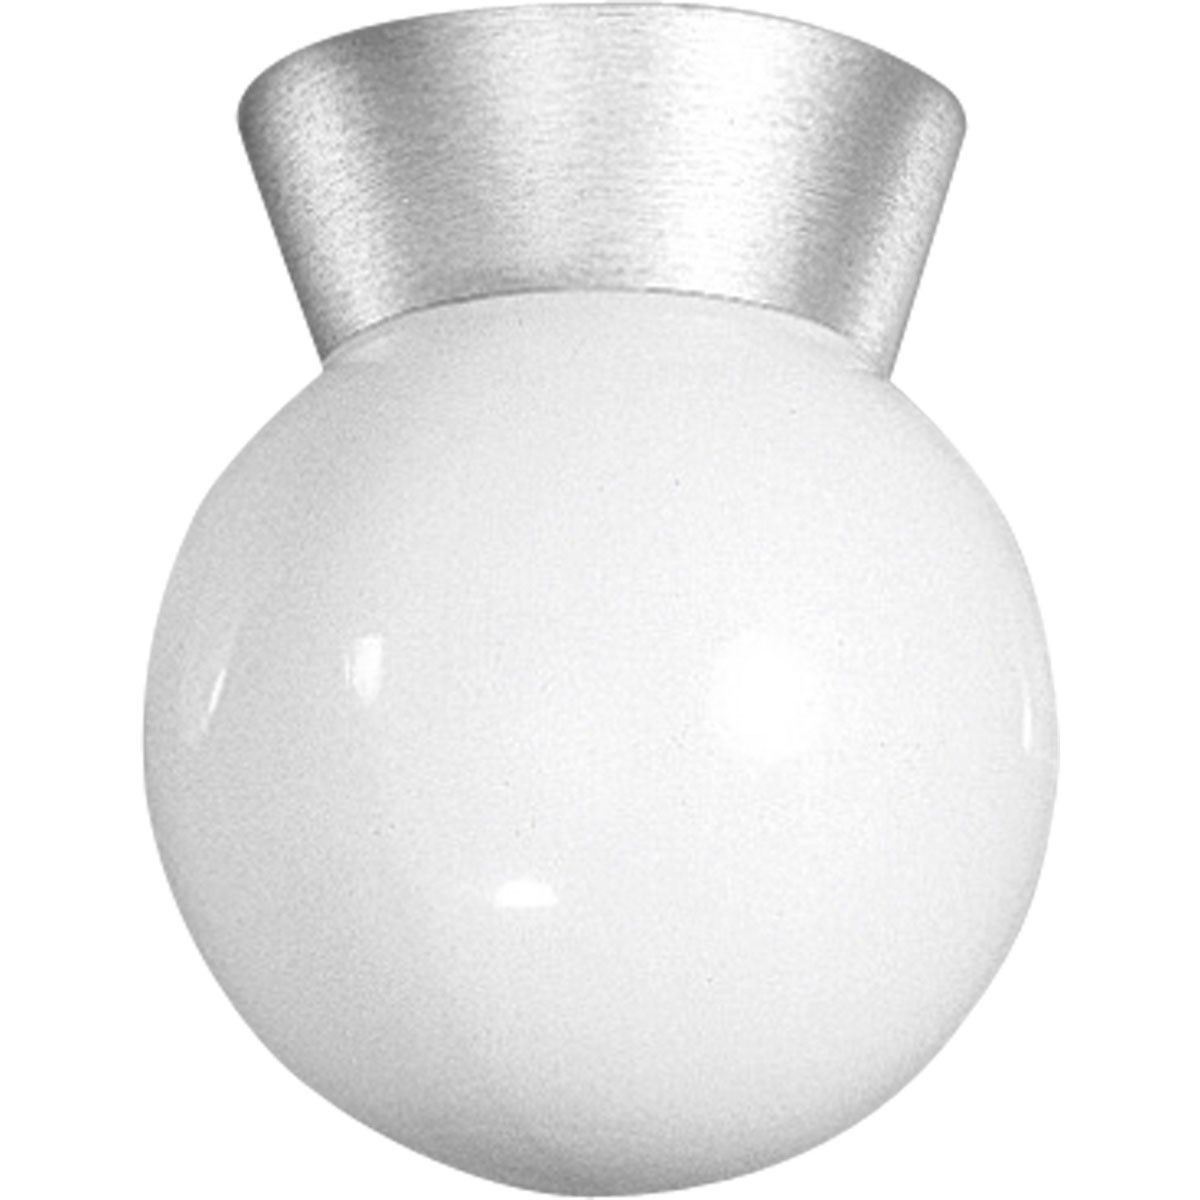 Current Outdoor Ceiling Lights At Amazon Regarding Light : Ceiling Lights Outdoor Light Fixture With Threaded Opal (View 8 of 20)